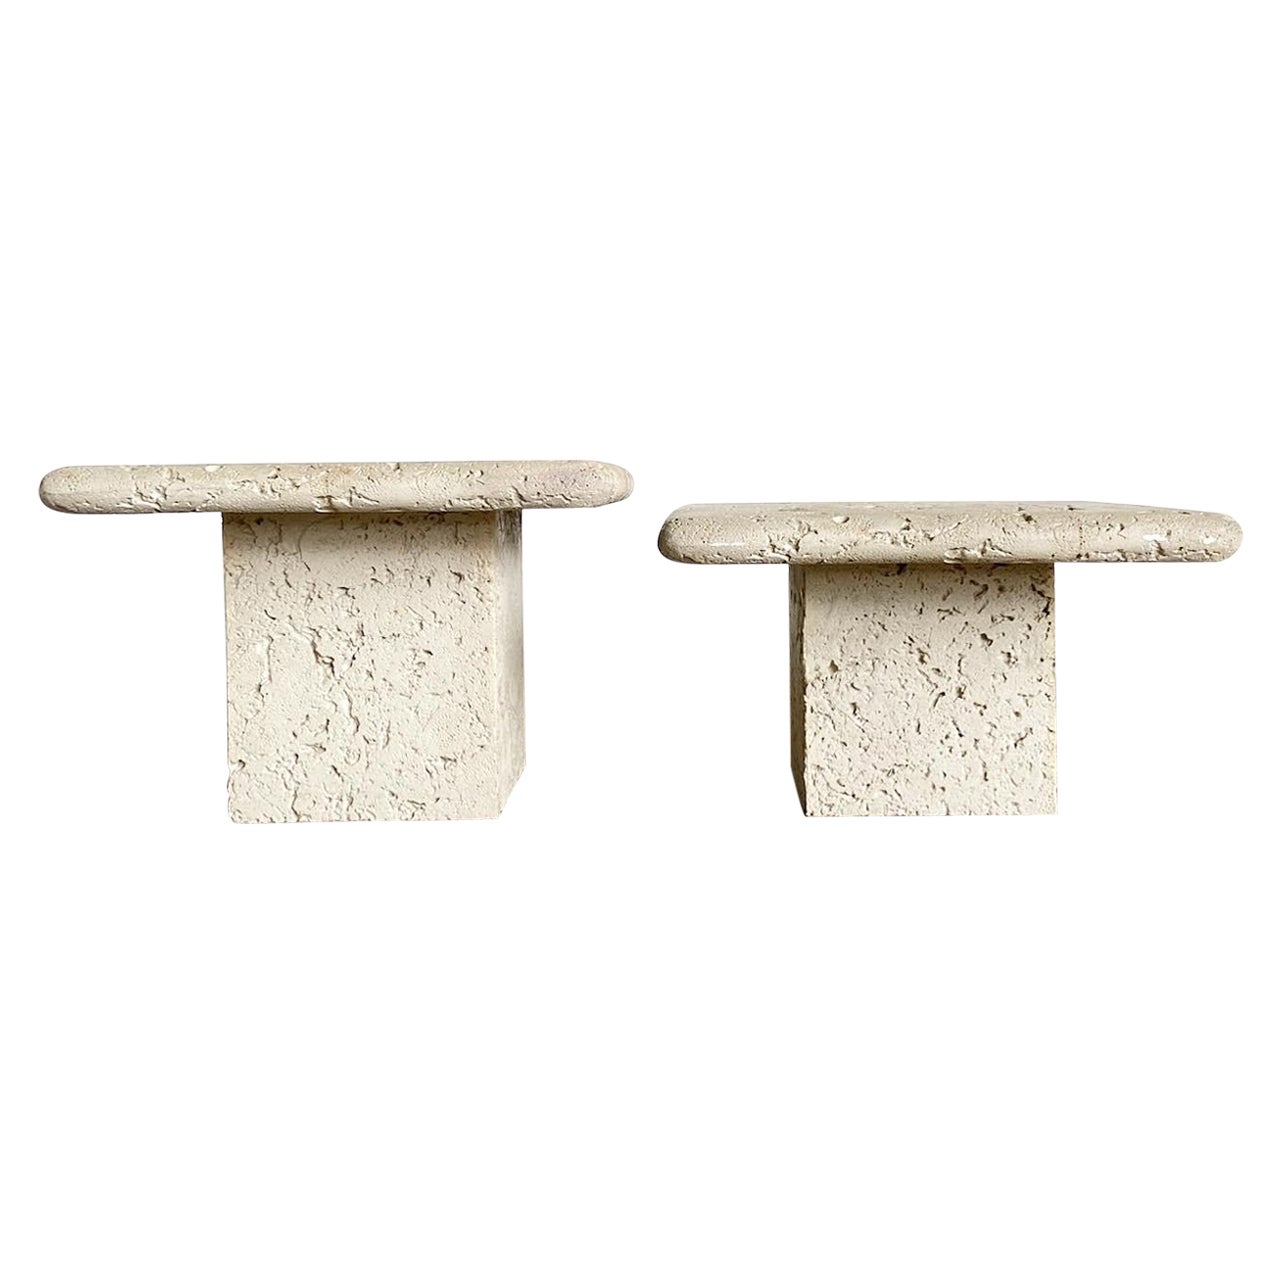 Faux Coquina Coral Cast Cement Square Top Mushroom Nesting Tables - a Pair For Sale